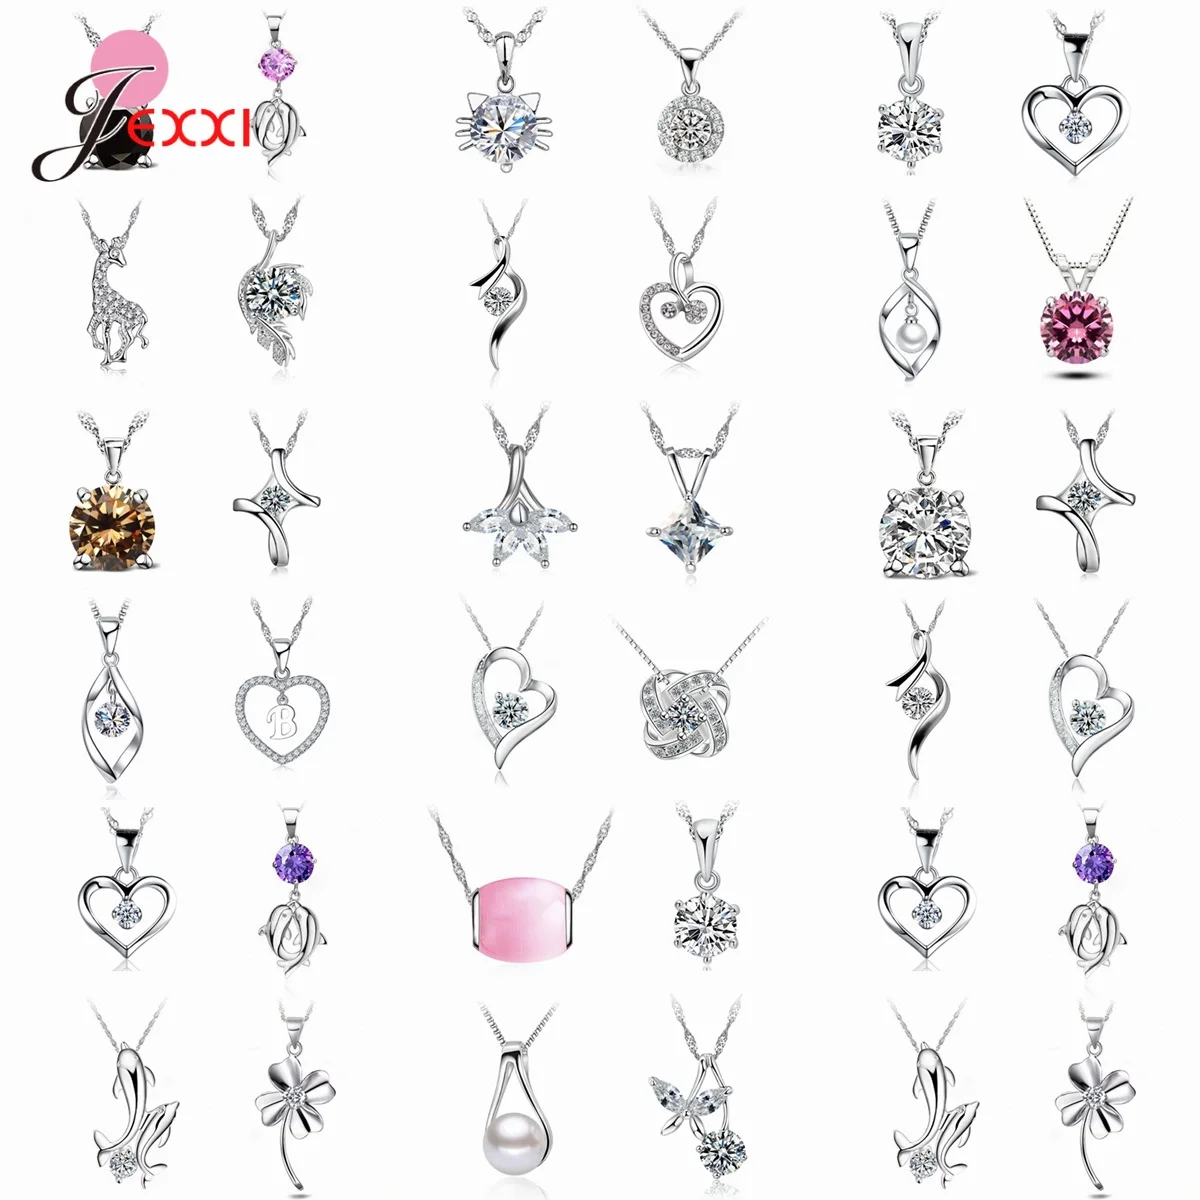 4pcs/Lot 925 Sterling Silver Jewelry Shiny Zirconia Flower Heart Pearl Pendant Necklace For Women Gift Birthday Wedding Party